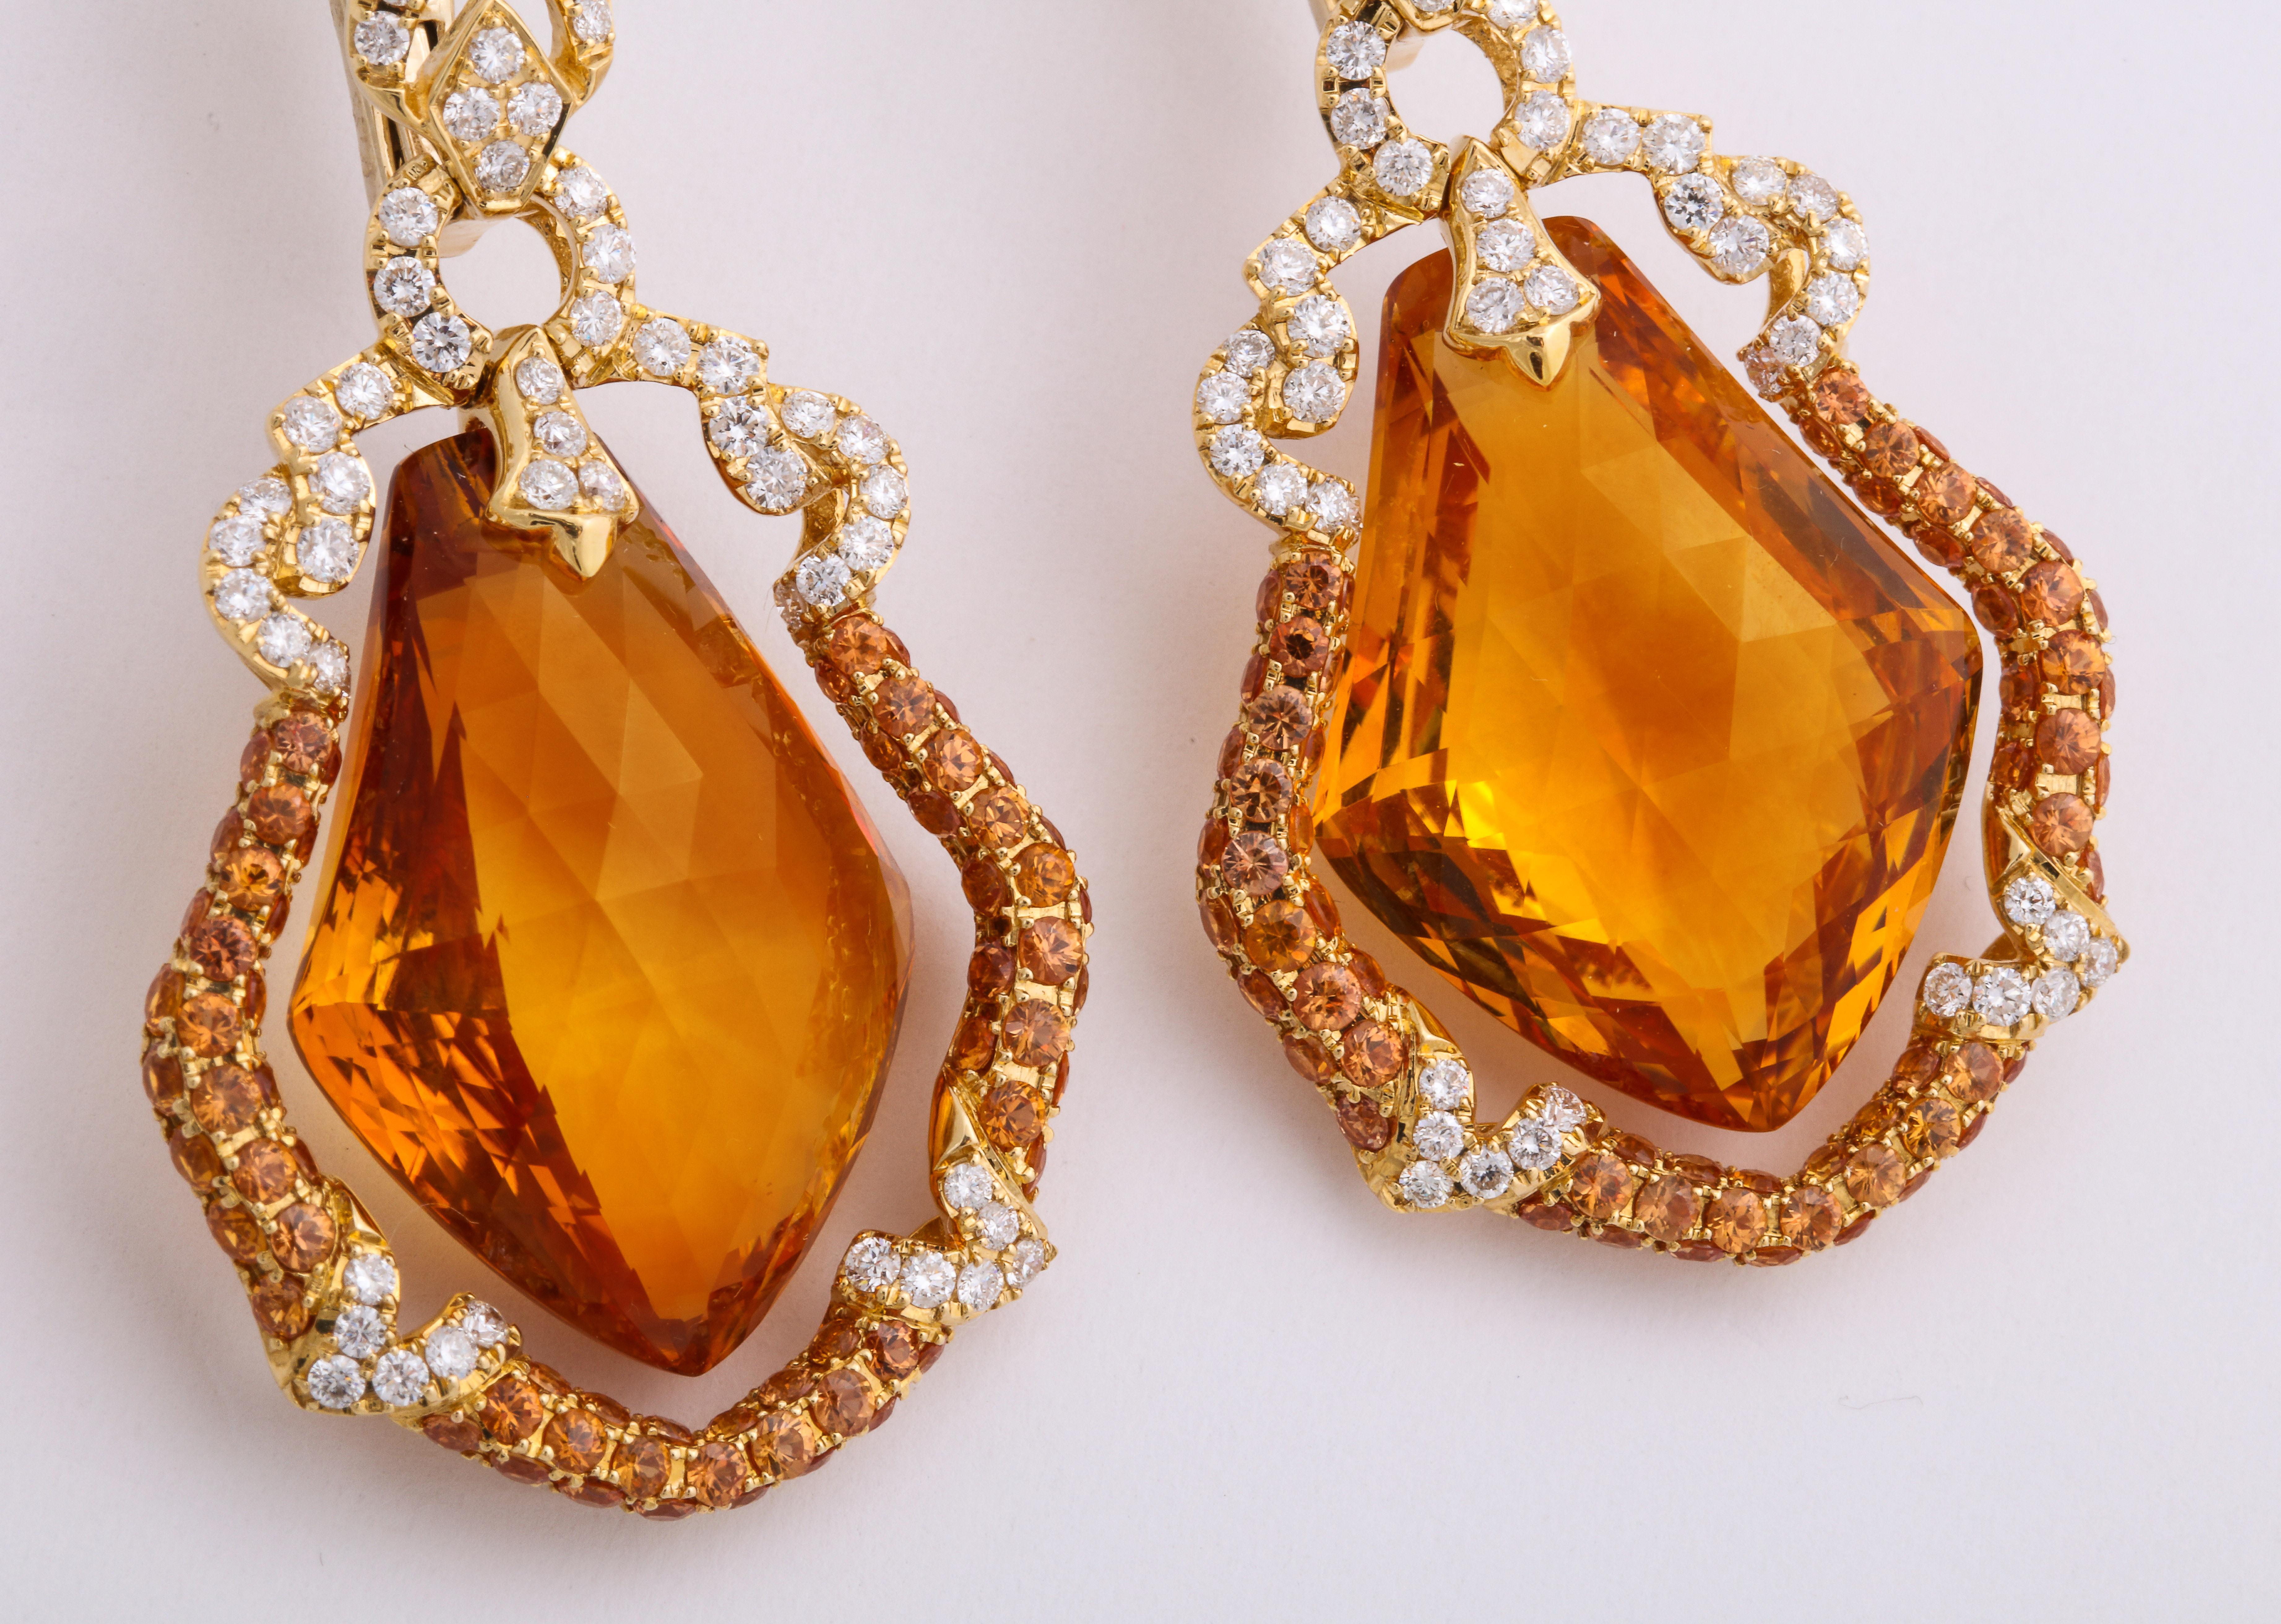 Artistic 18K yellow gold earrings decorated with colorless round brilliant-diamonds: 1.67 carats, suspending kite-shape, briolette honey-color citrine: 51.76 carats, within a frame of pave'-set, diamond-cut orange sapphires: 3.47 carats.
French